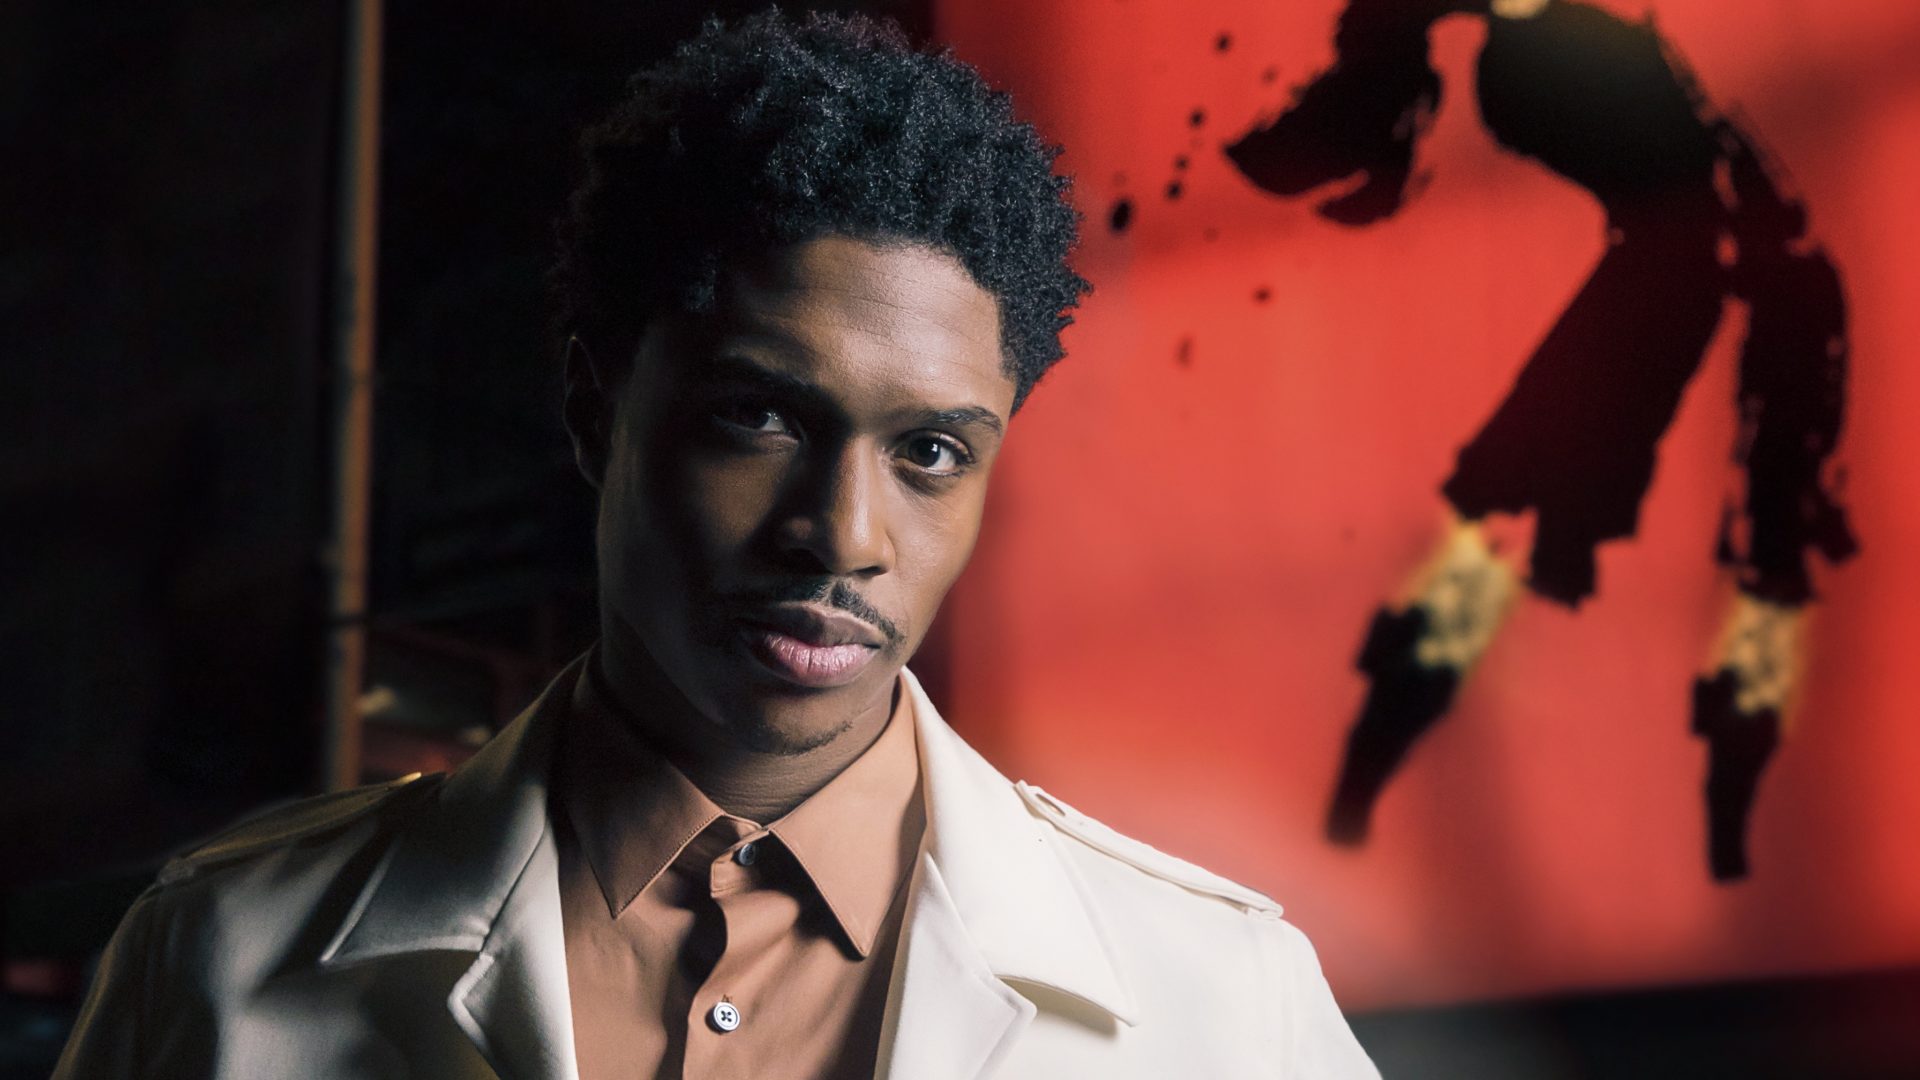 Exclusive: Ephraim Sykes Speaks About Being Cast as Michael Jackson In “MJ” The Musical